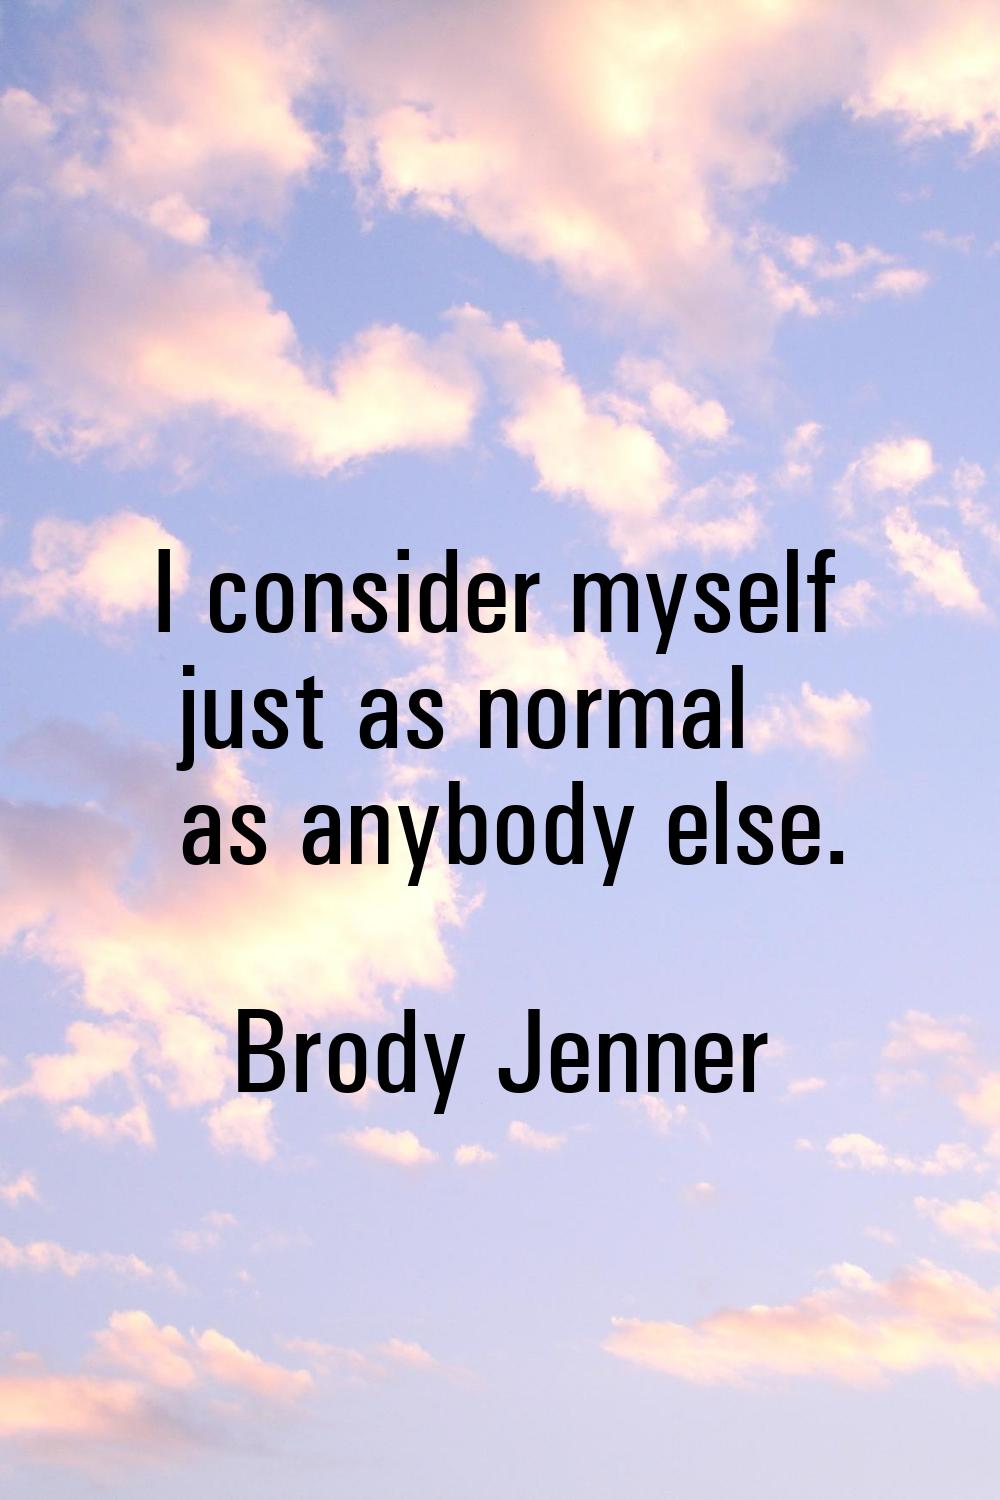 I consider myself just as normal as anybody else.